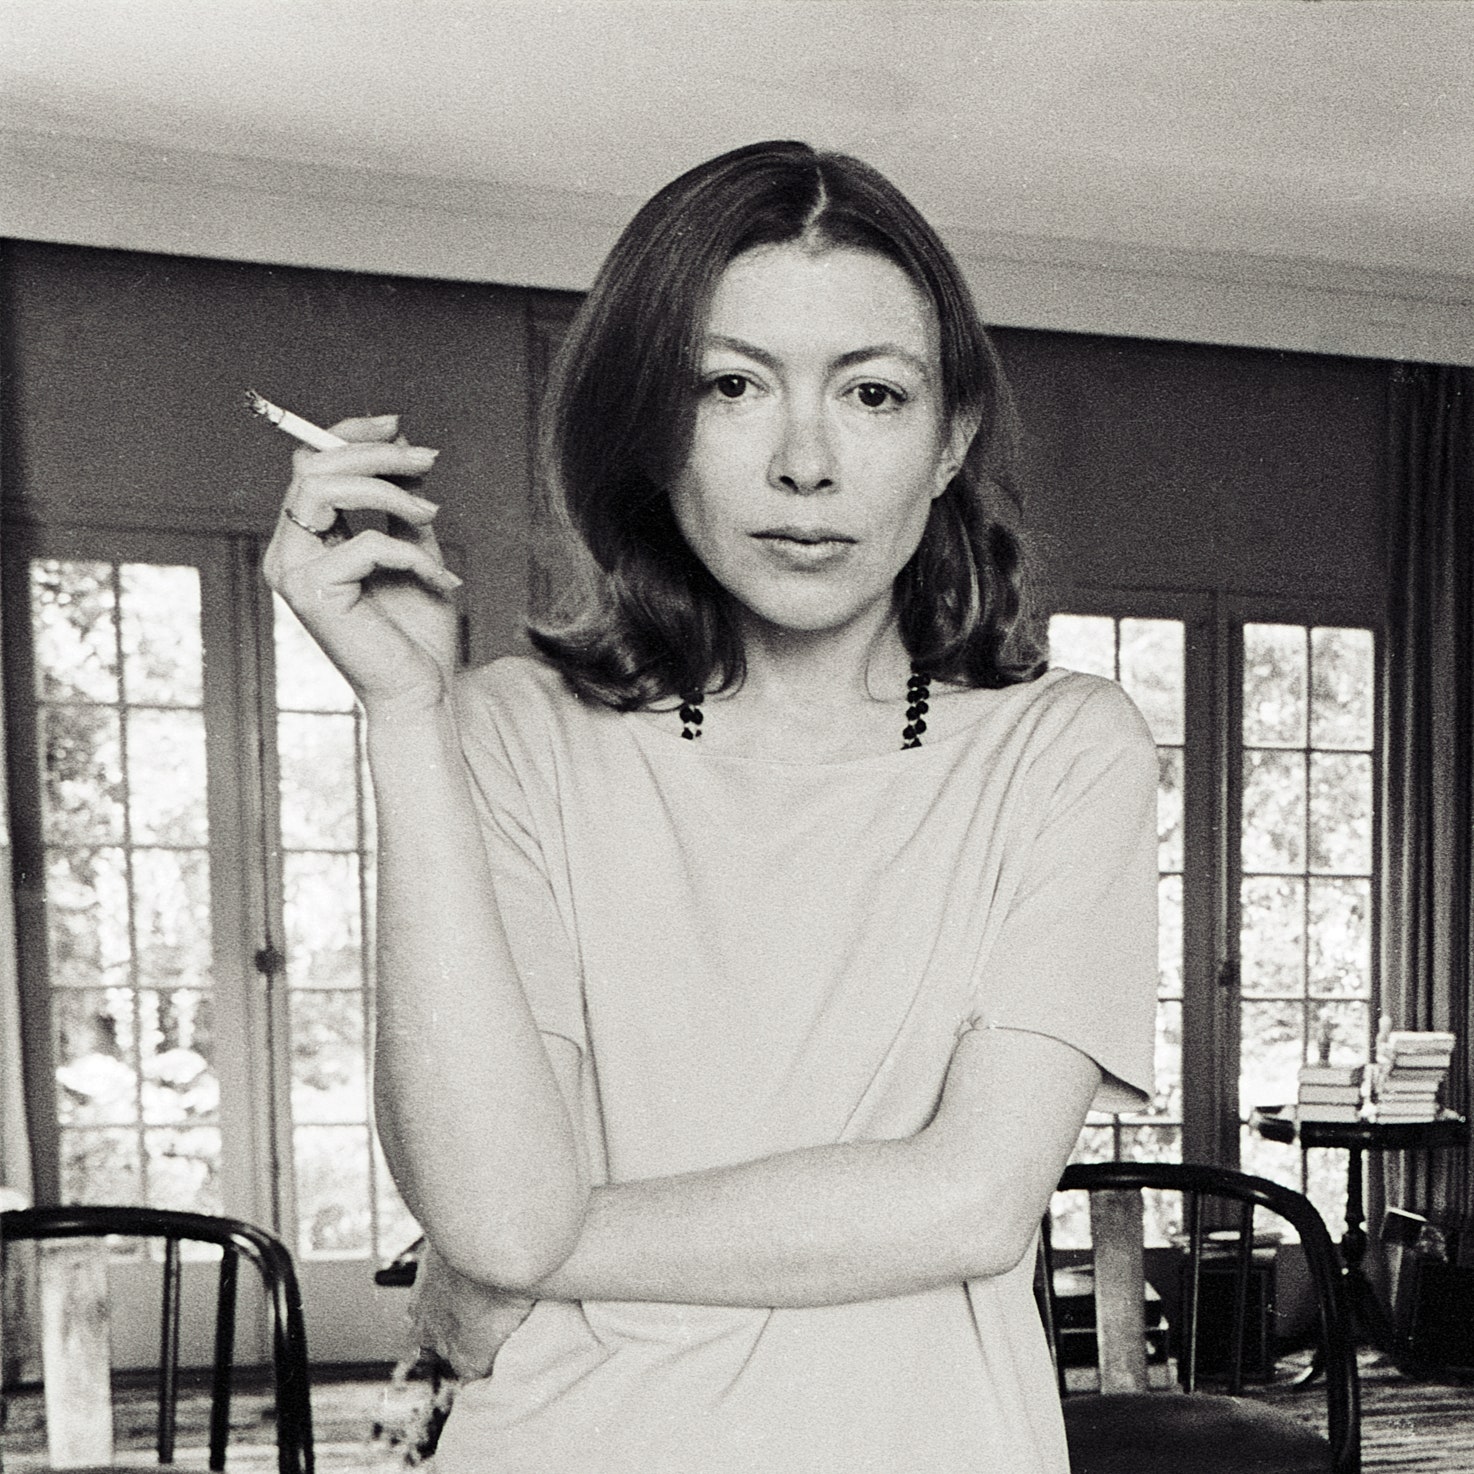 Remembering Joan Didion: 'Her ability to operate outside of